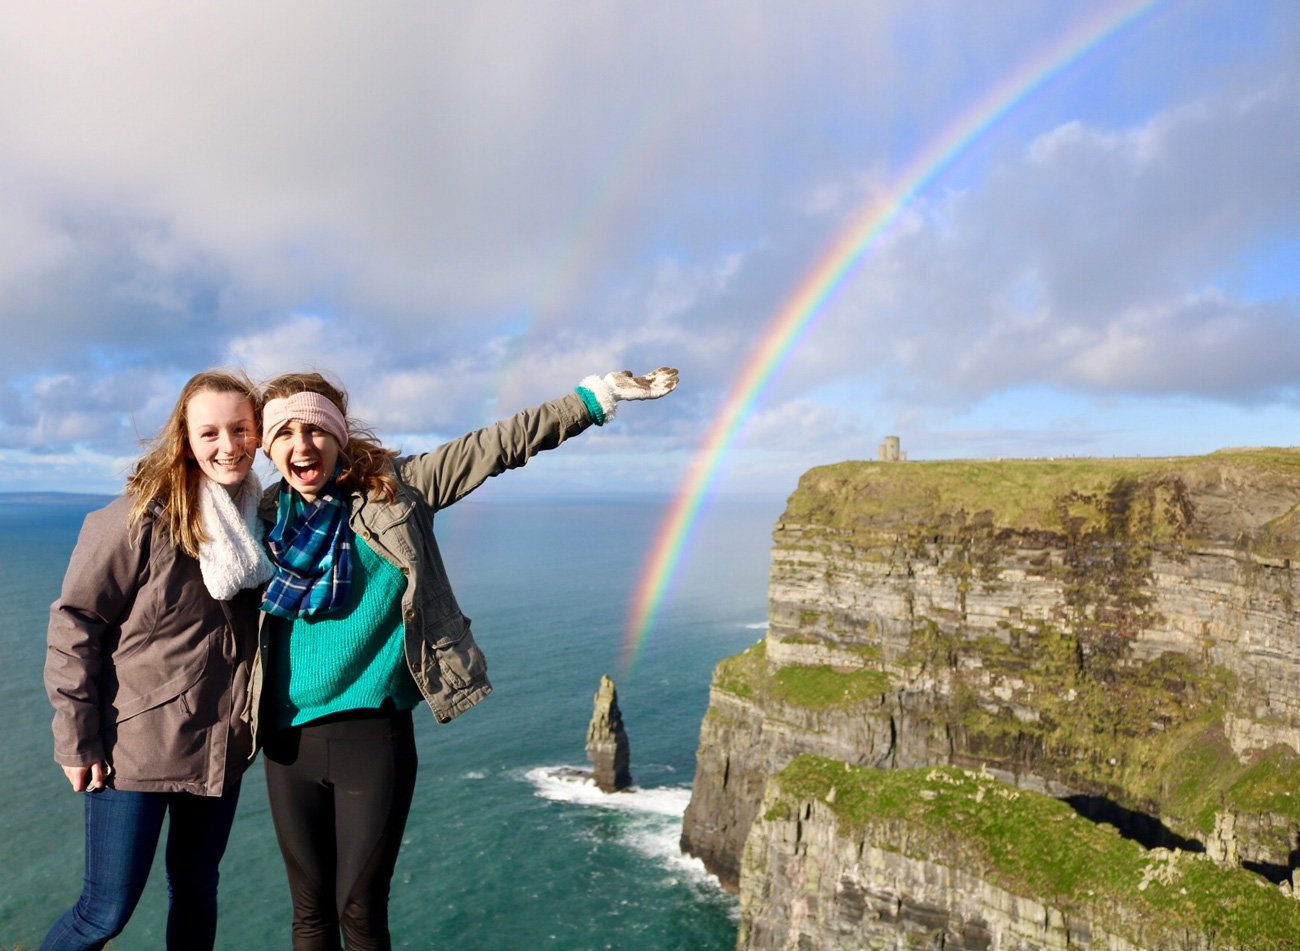 Study abroad students smiling and taking a photo with a double rainbow behind them in Ireland